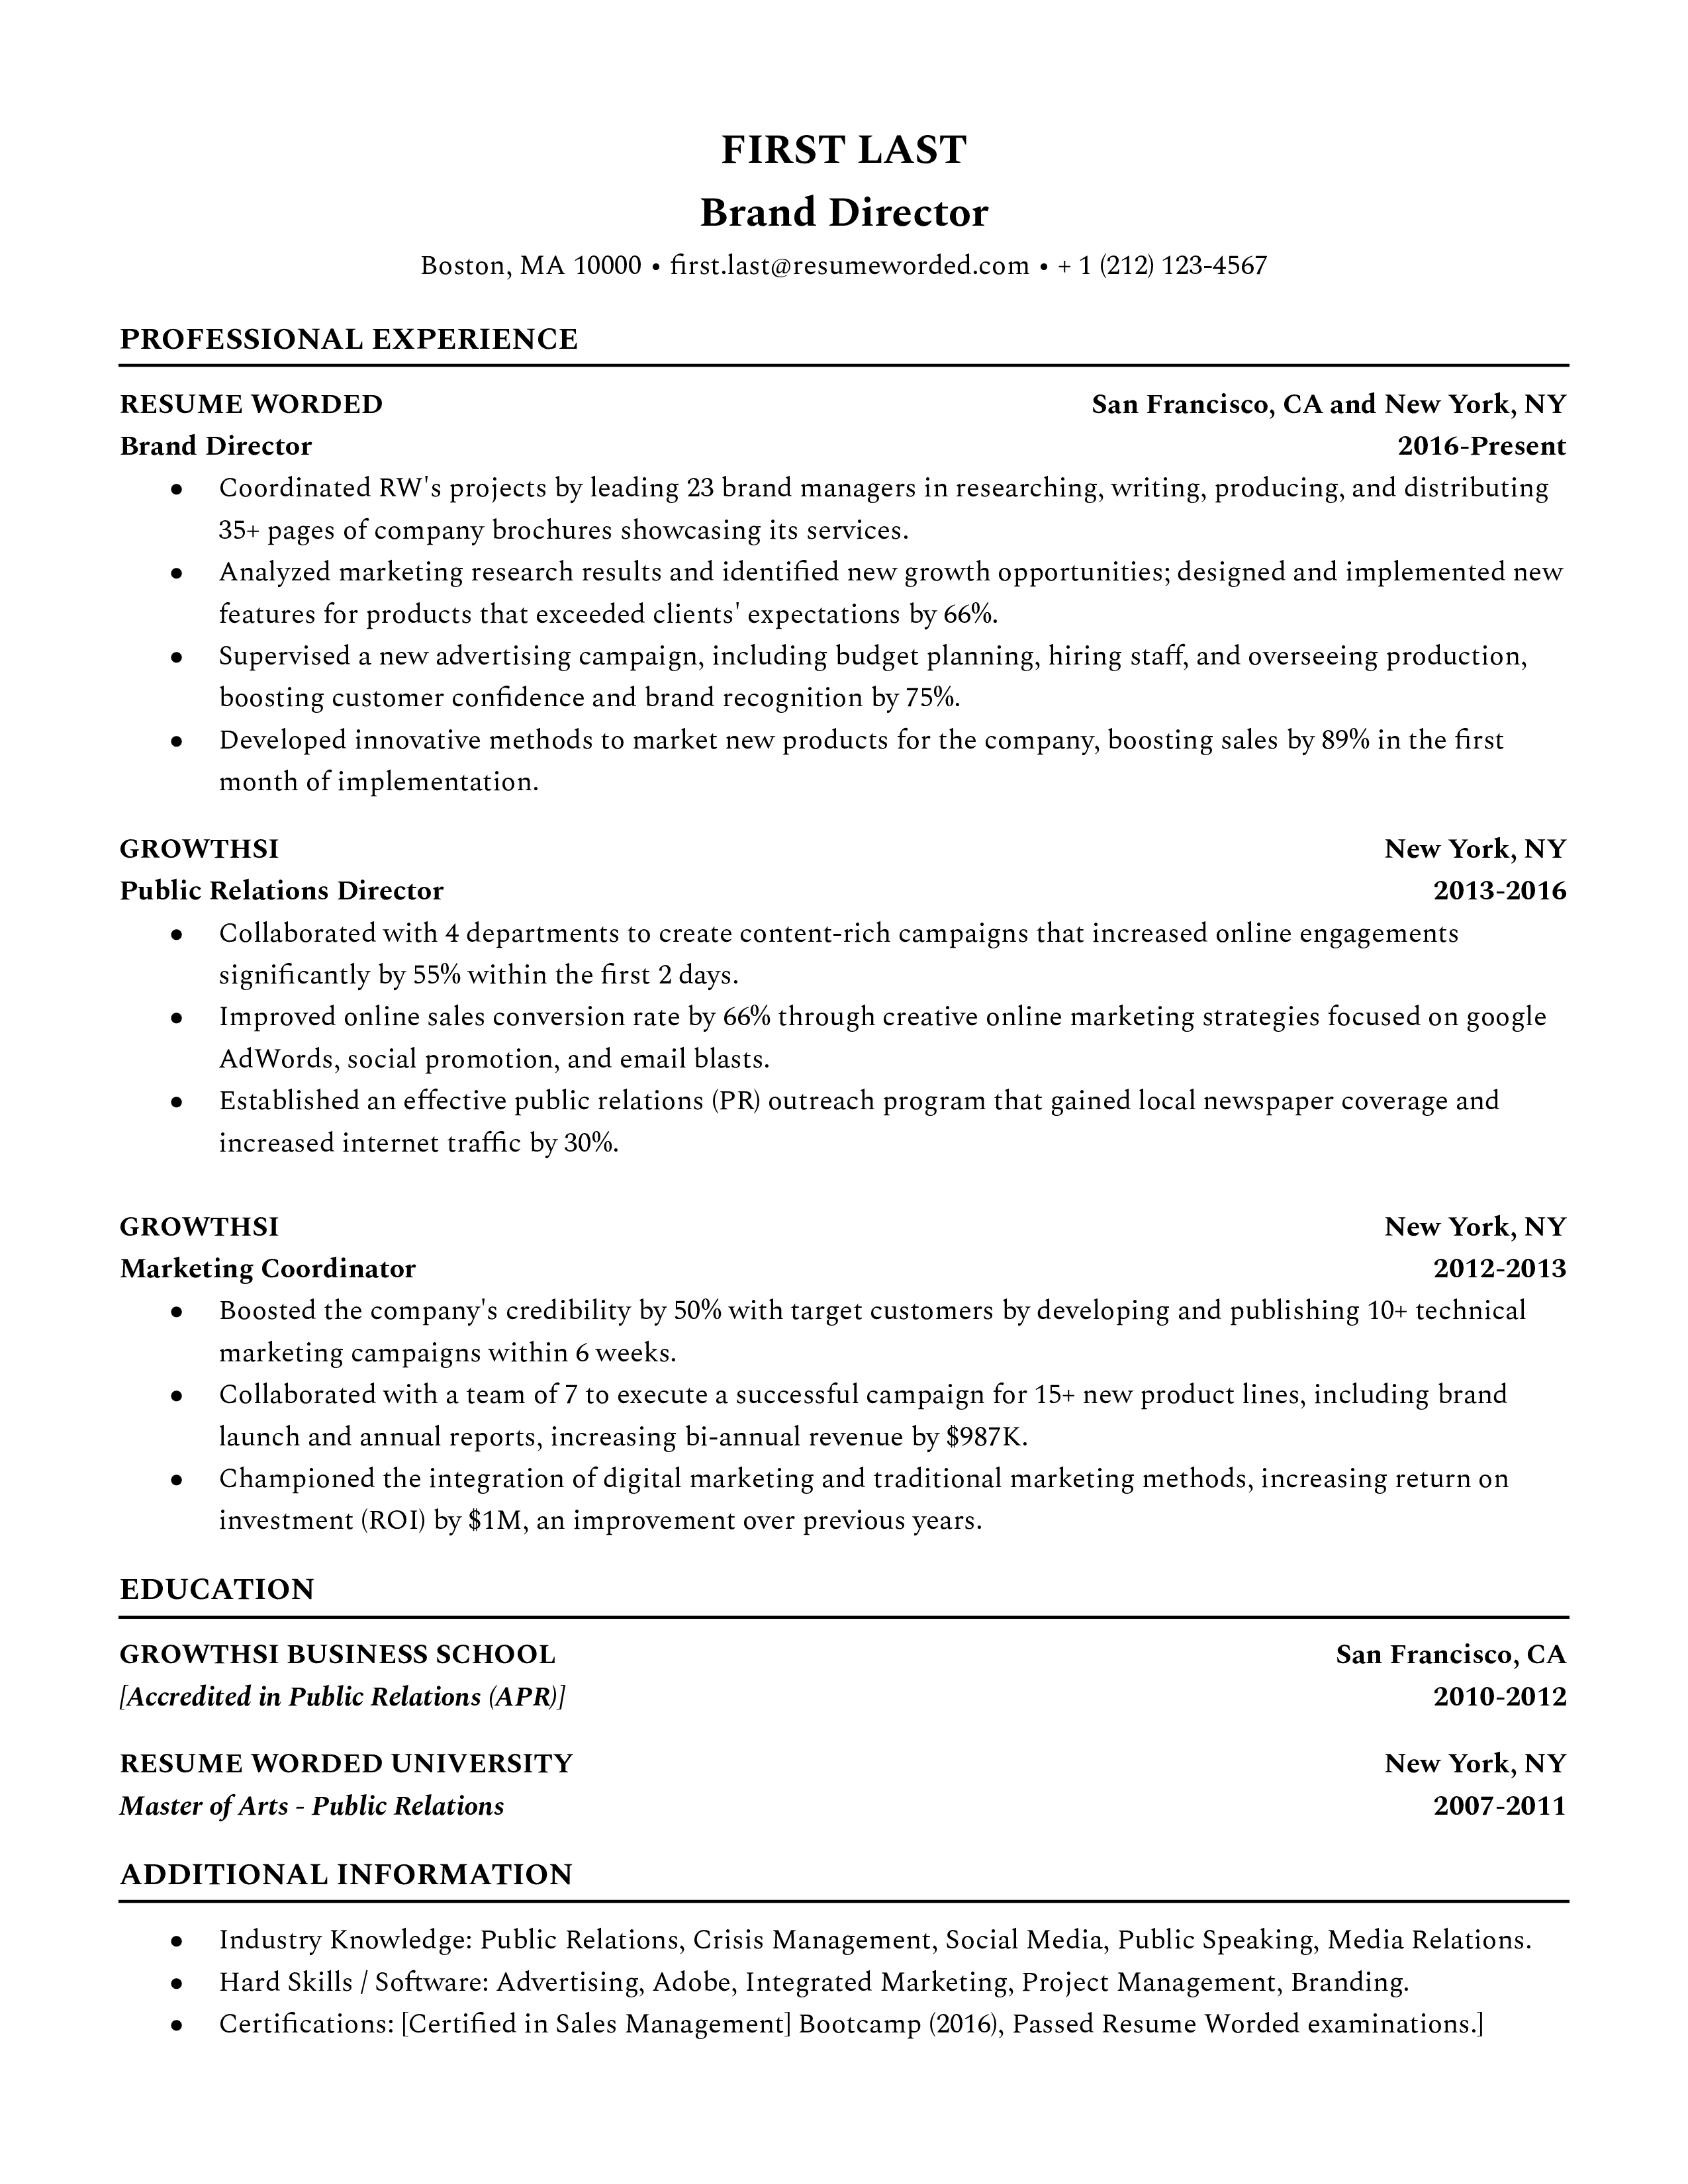 A well-crafted CV for a Brand Director position.